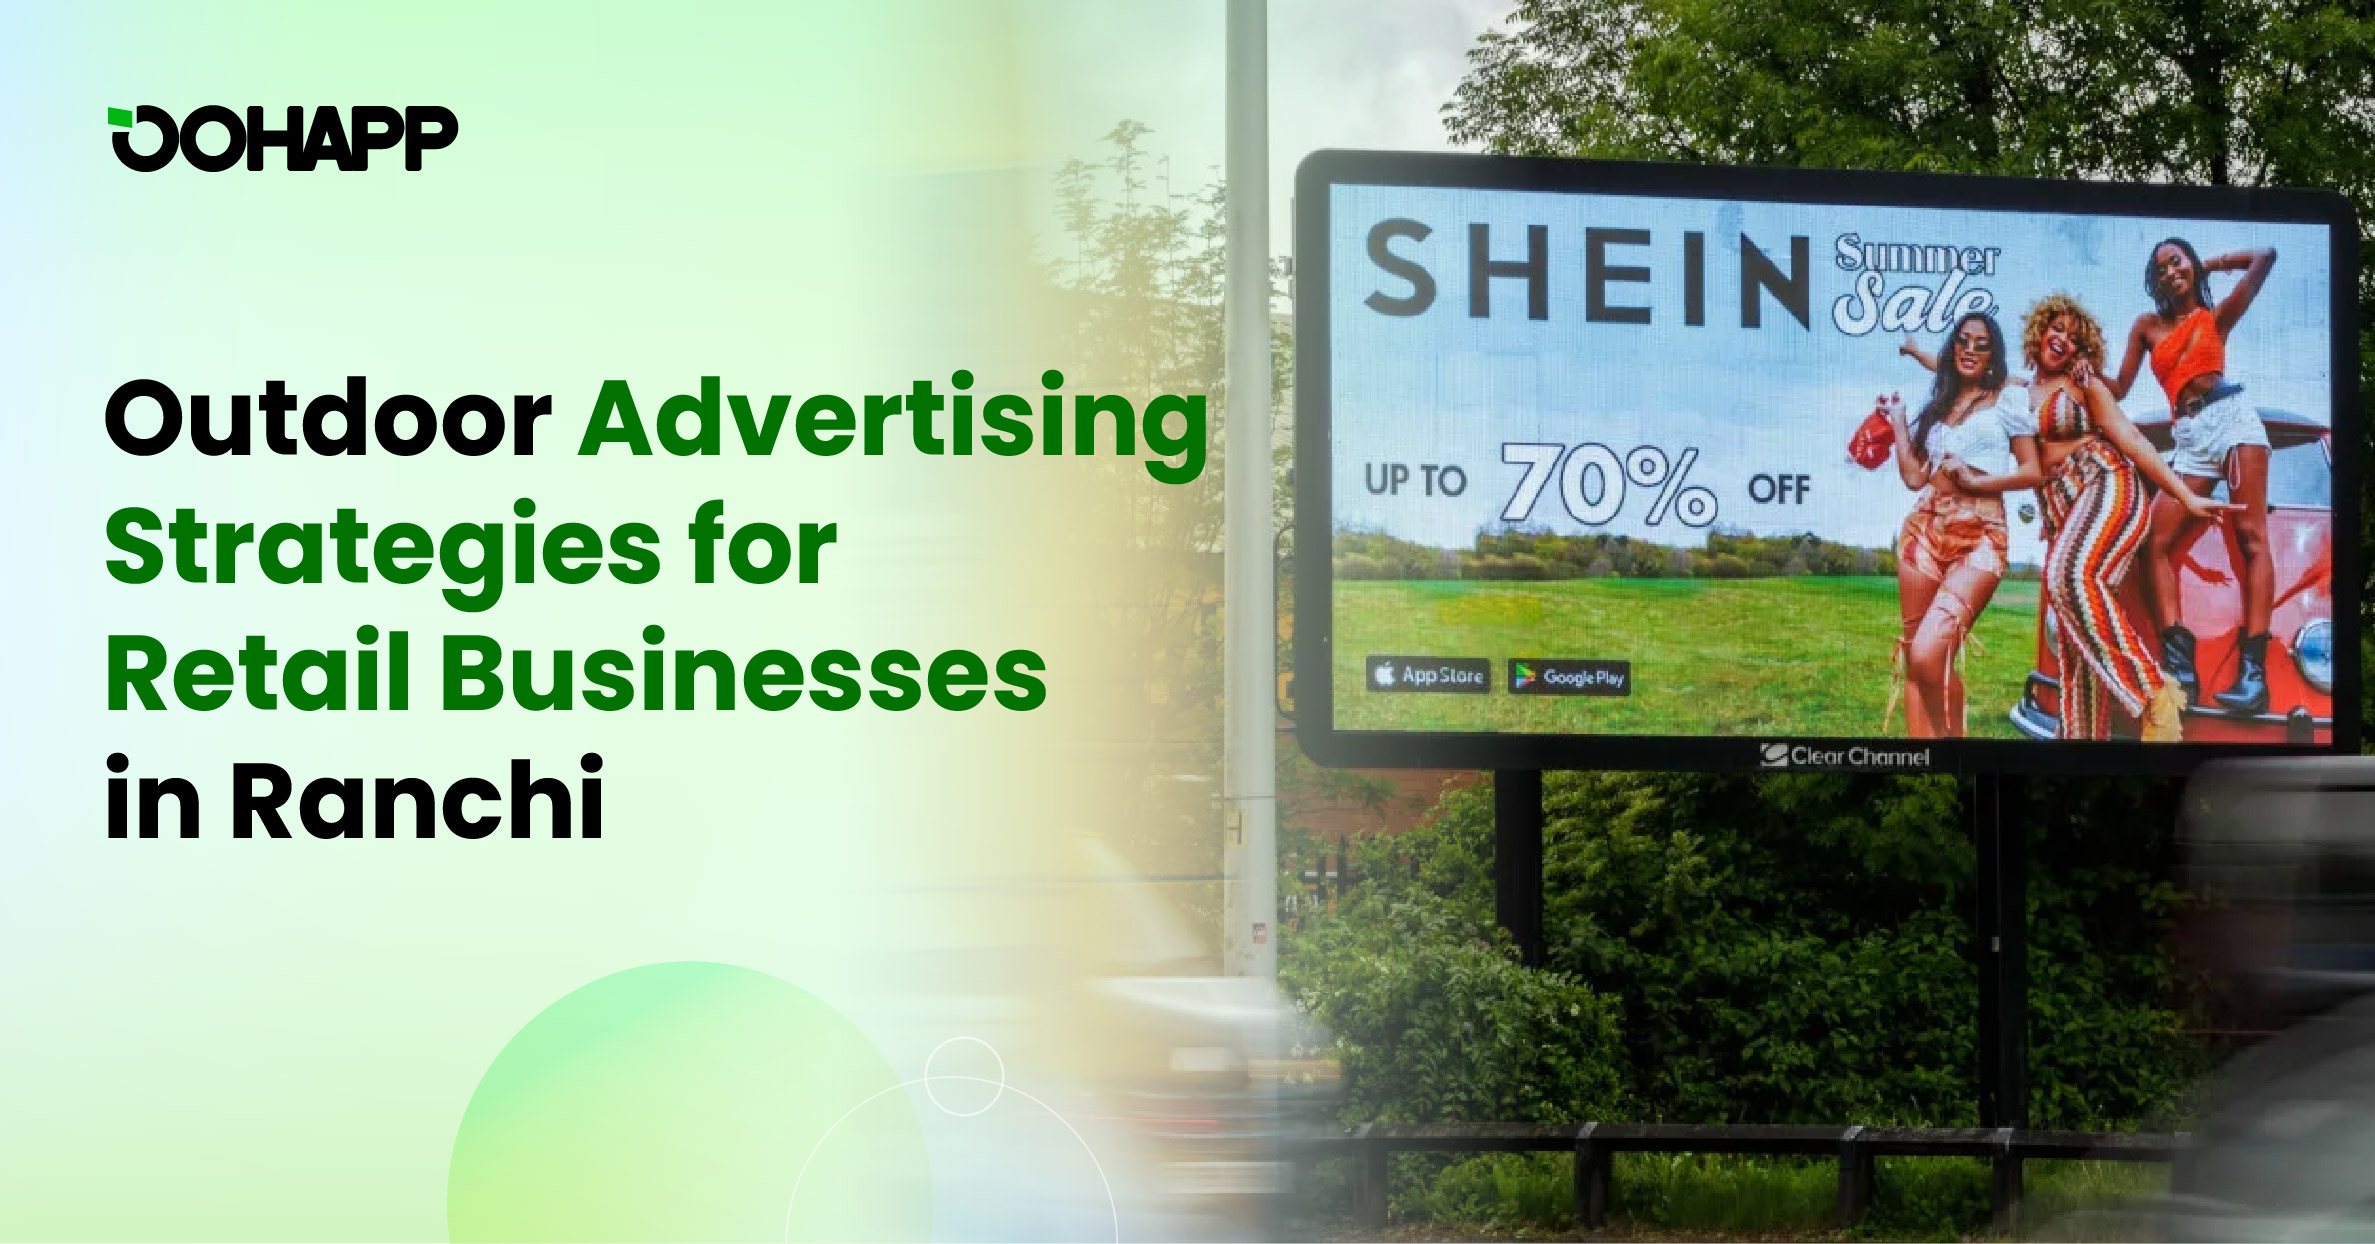 Outdoor Advertising Strategies for Retail Businesses in Ranchi